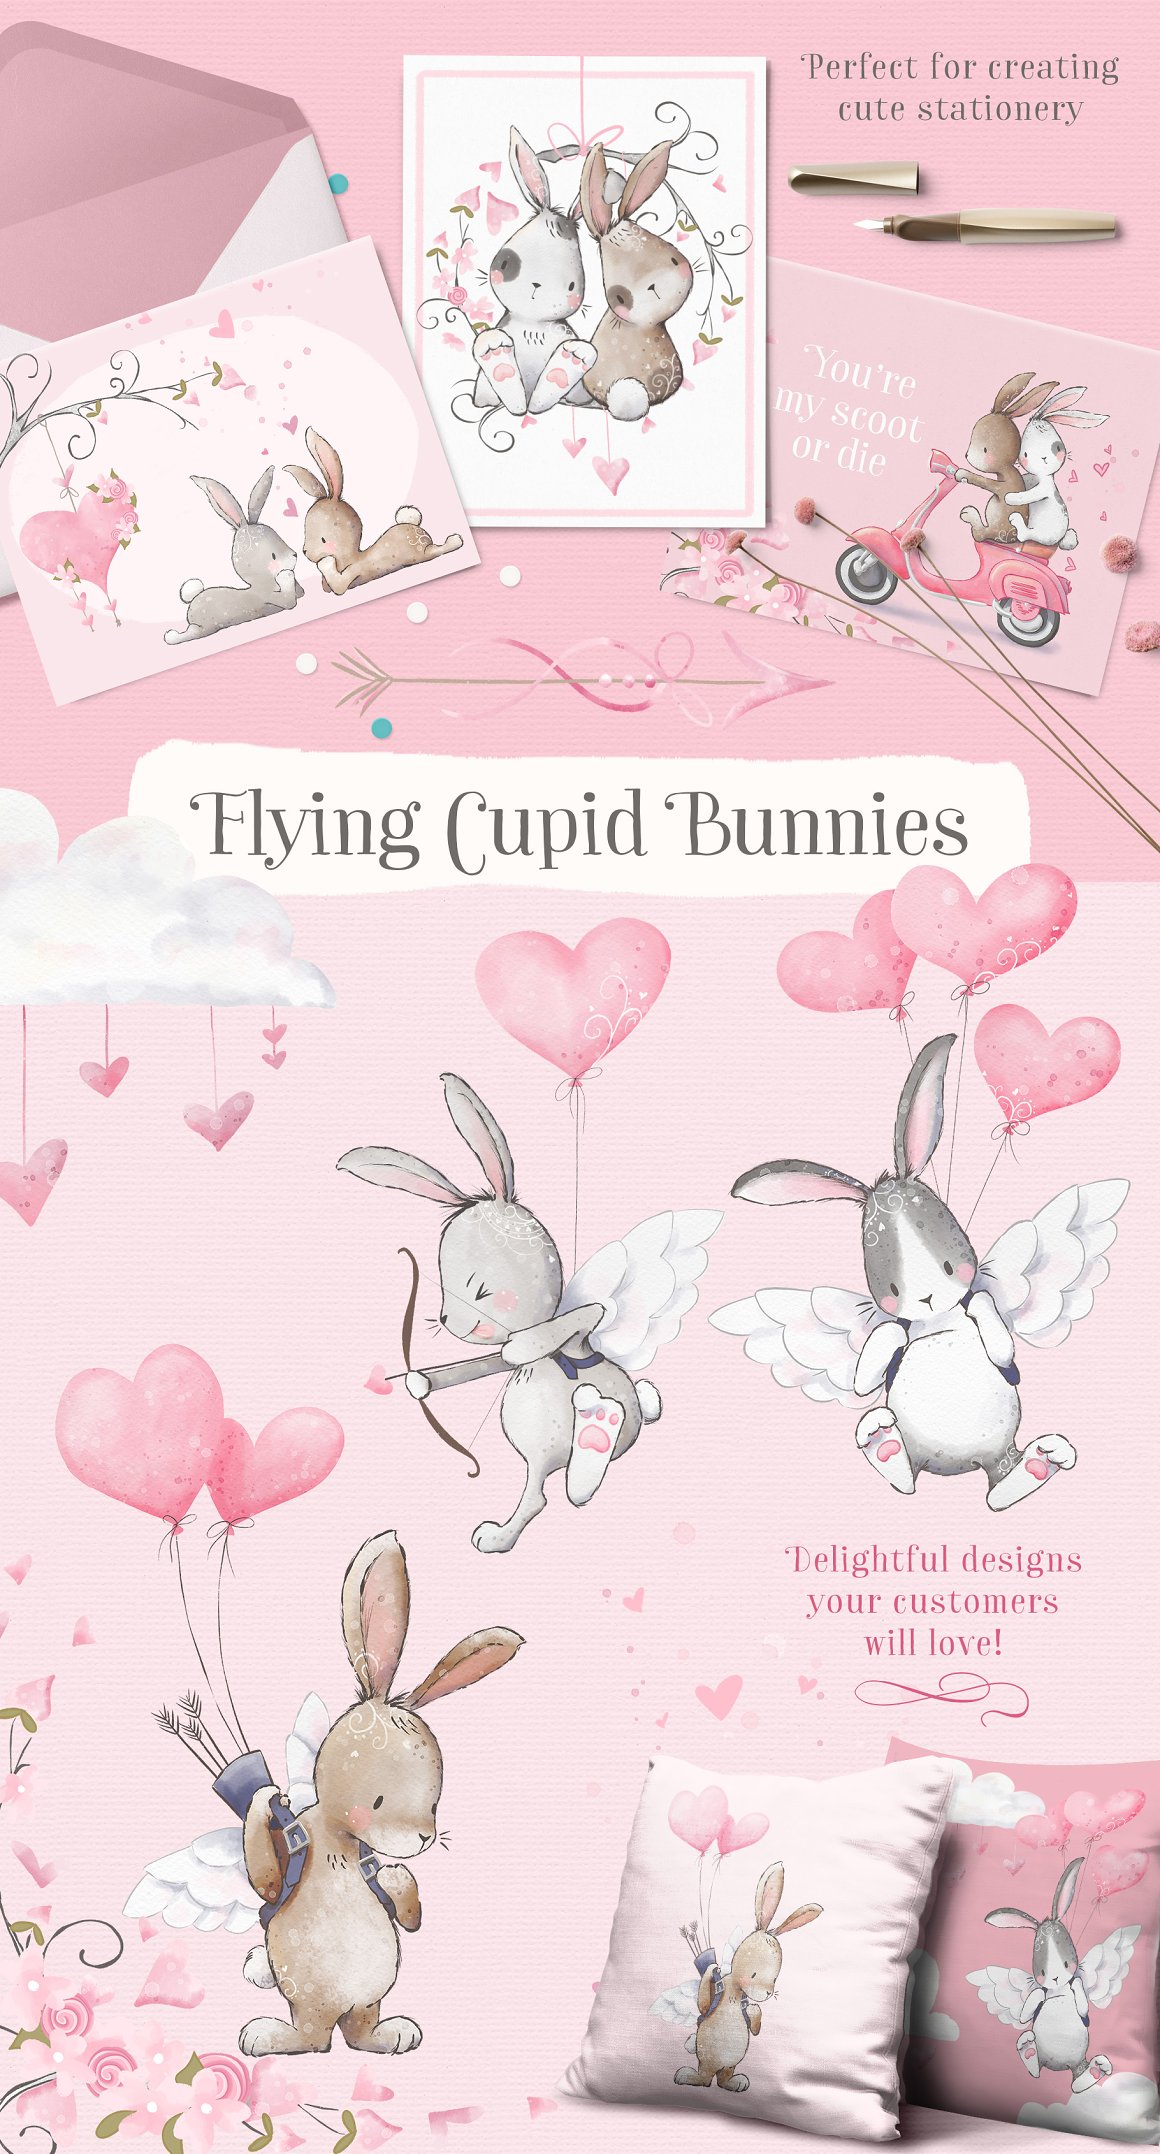 A set of 3 different illustrations of a flying cupid bunny on a pink background.